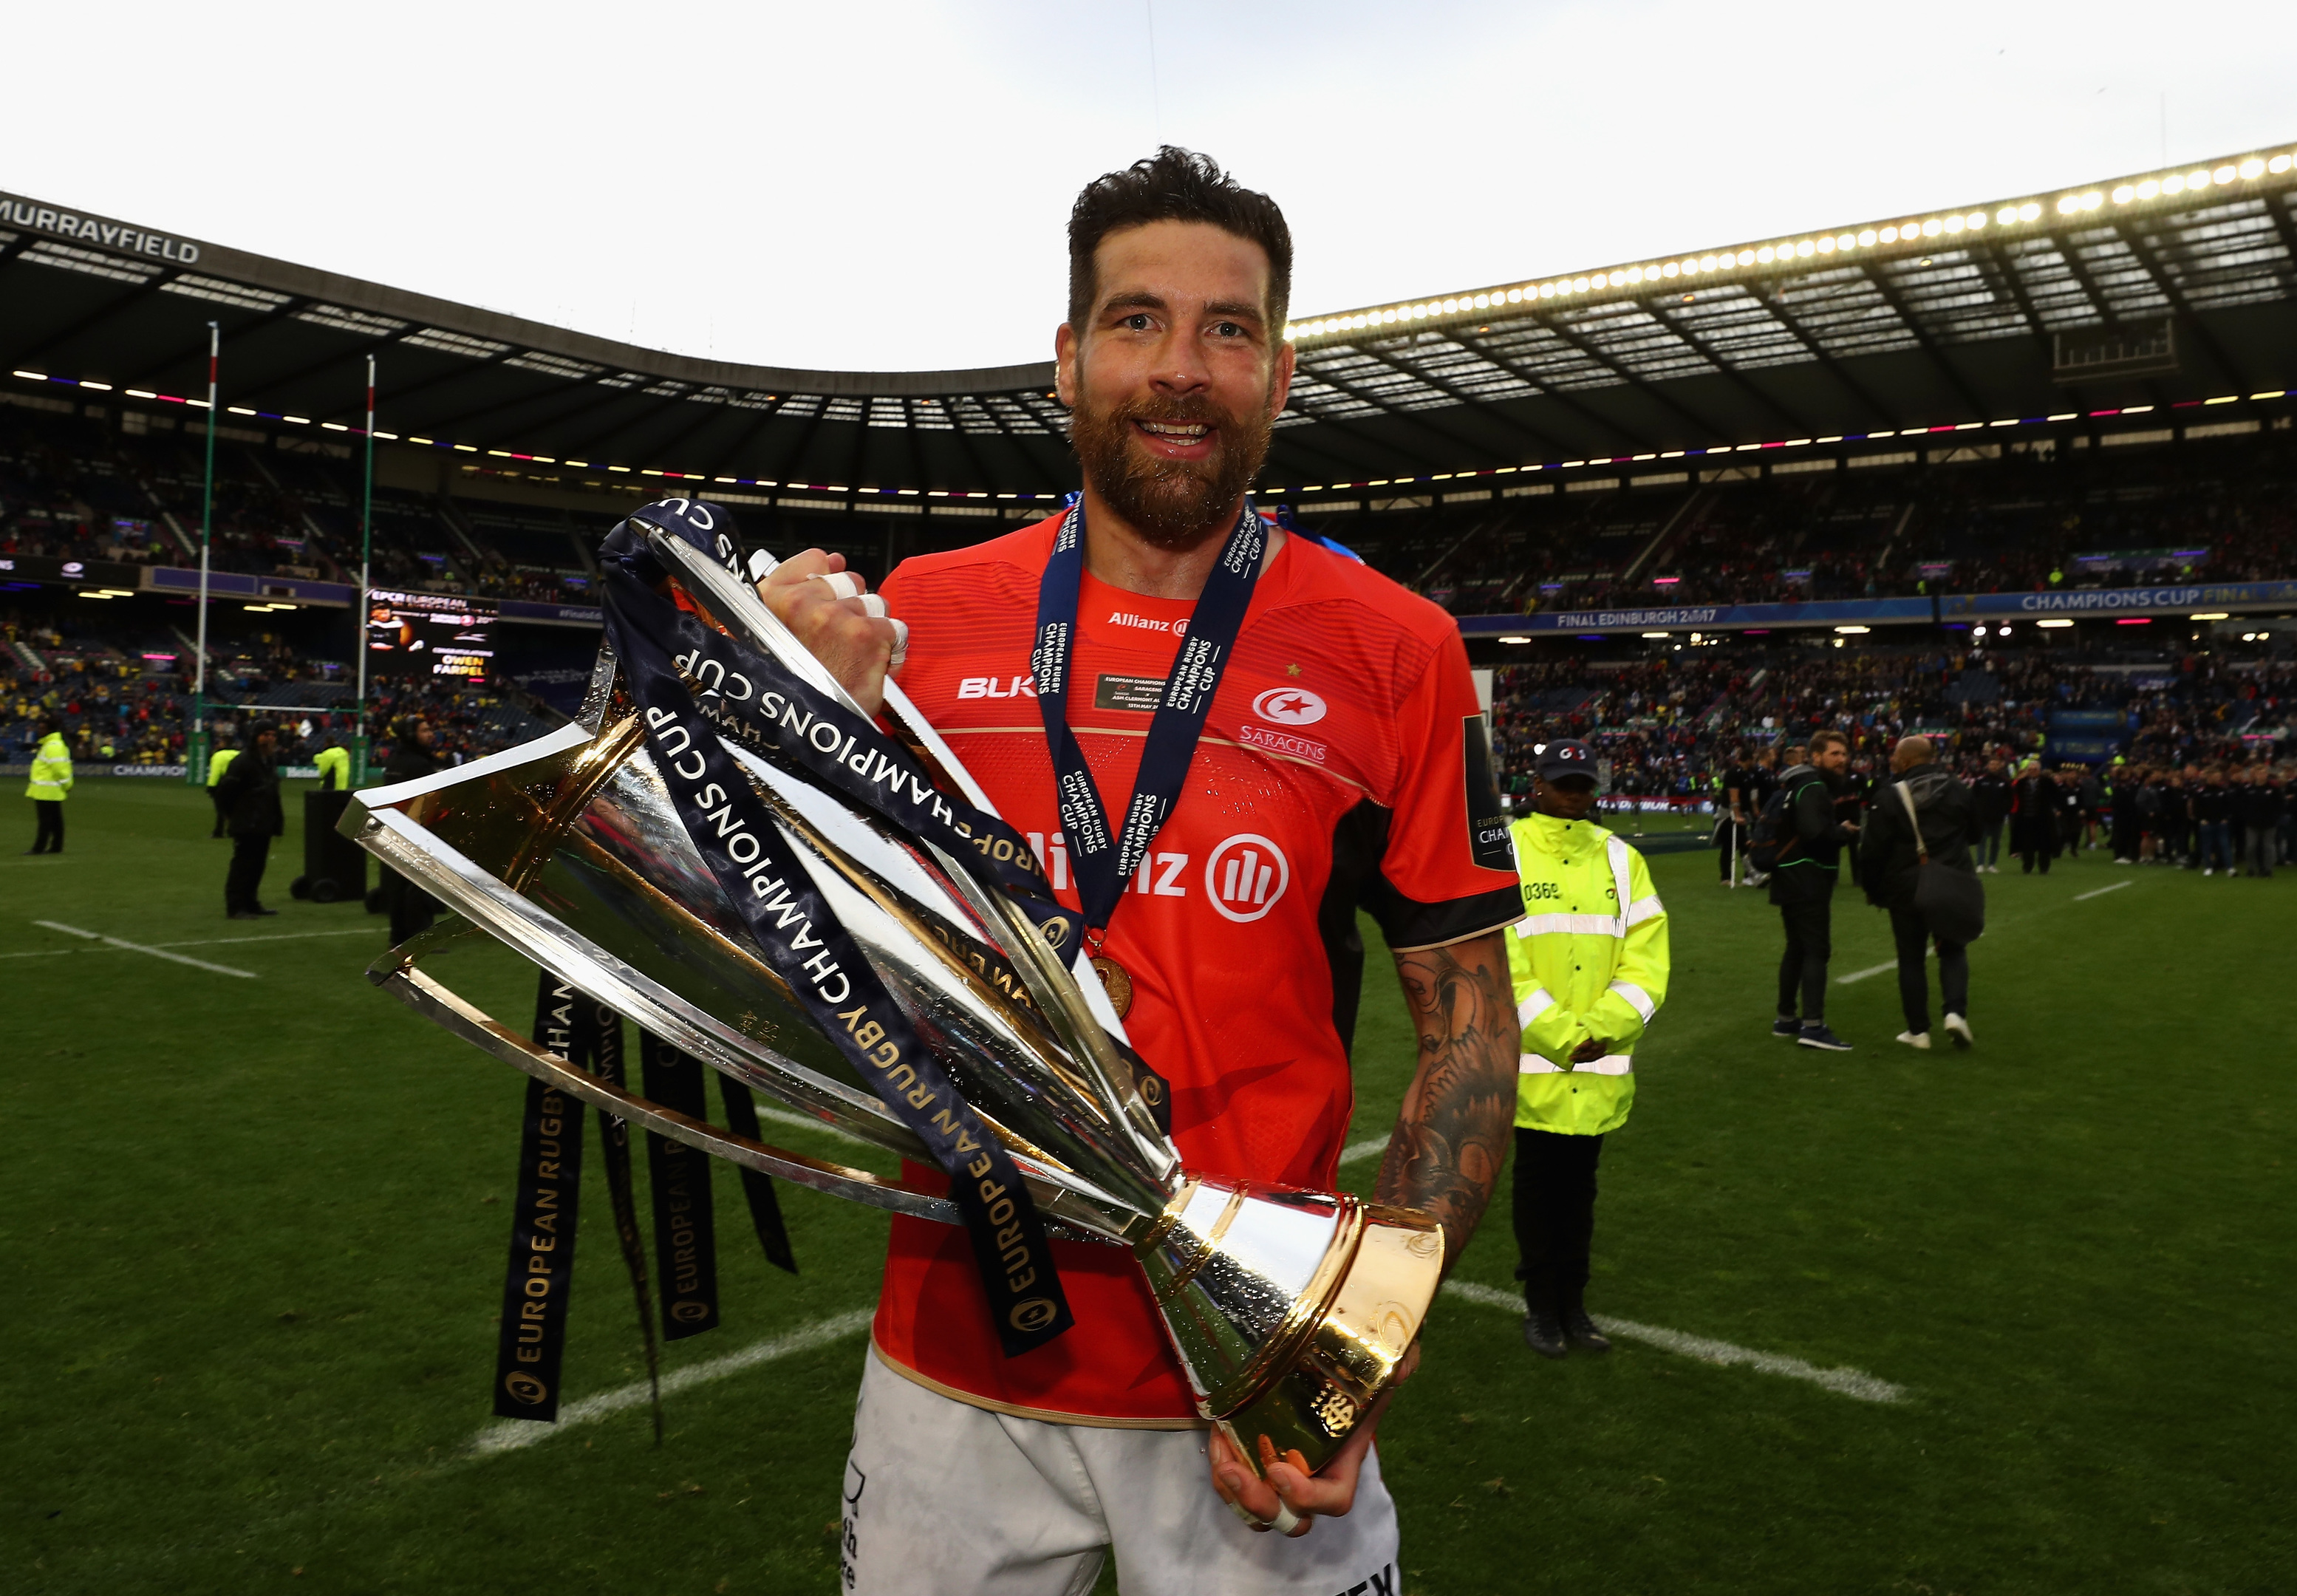 Jim Hamilton with the trophy after Saturday's win by Saracens over Clermont-Auvergne at Murrayfield.